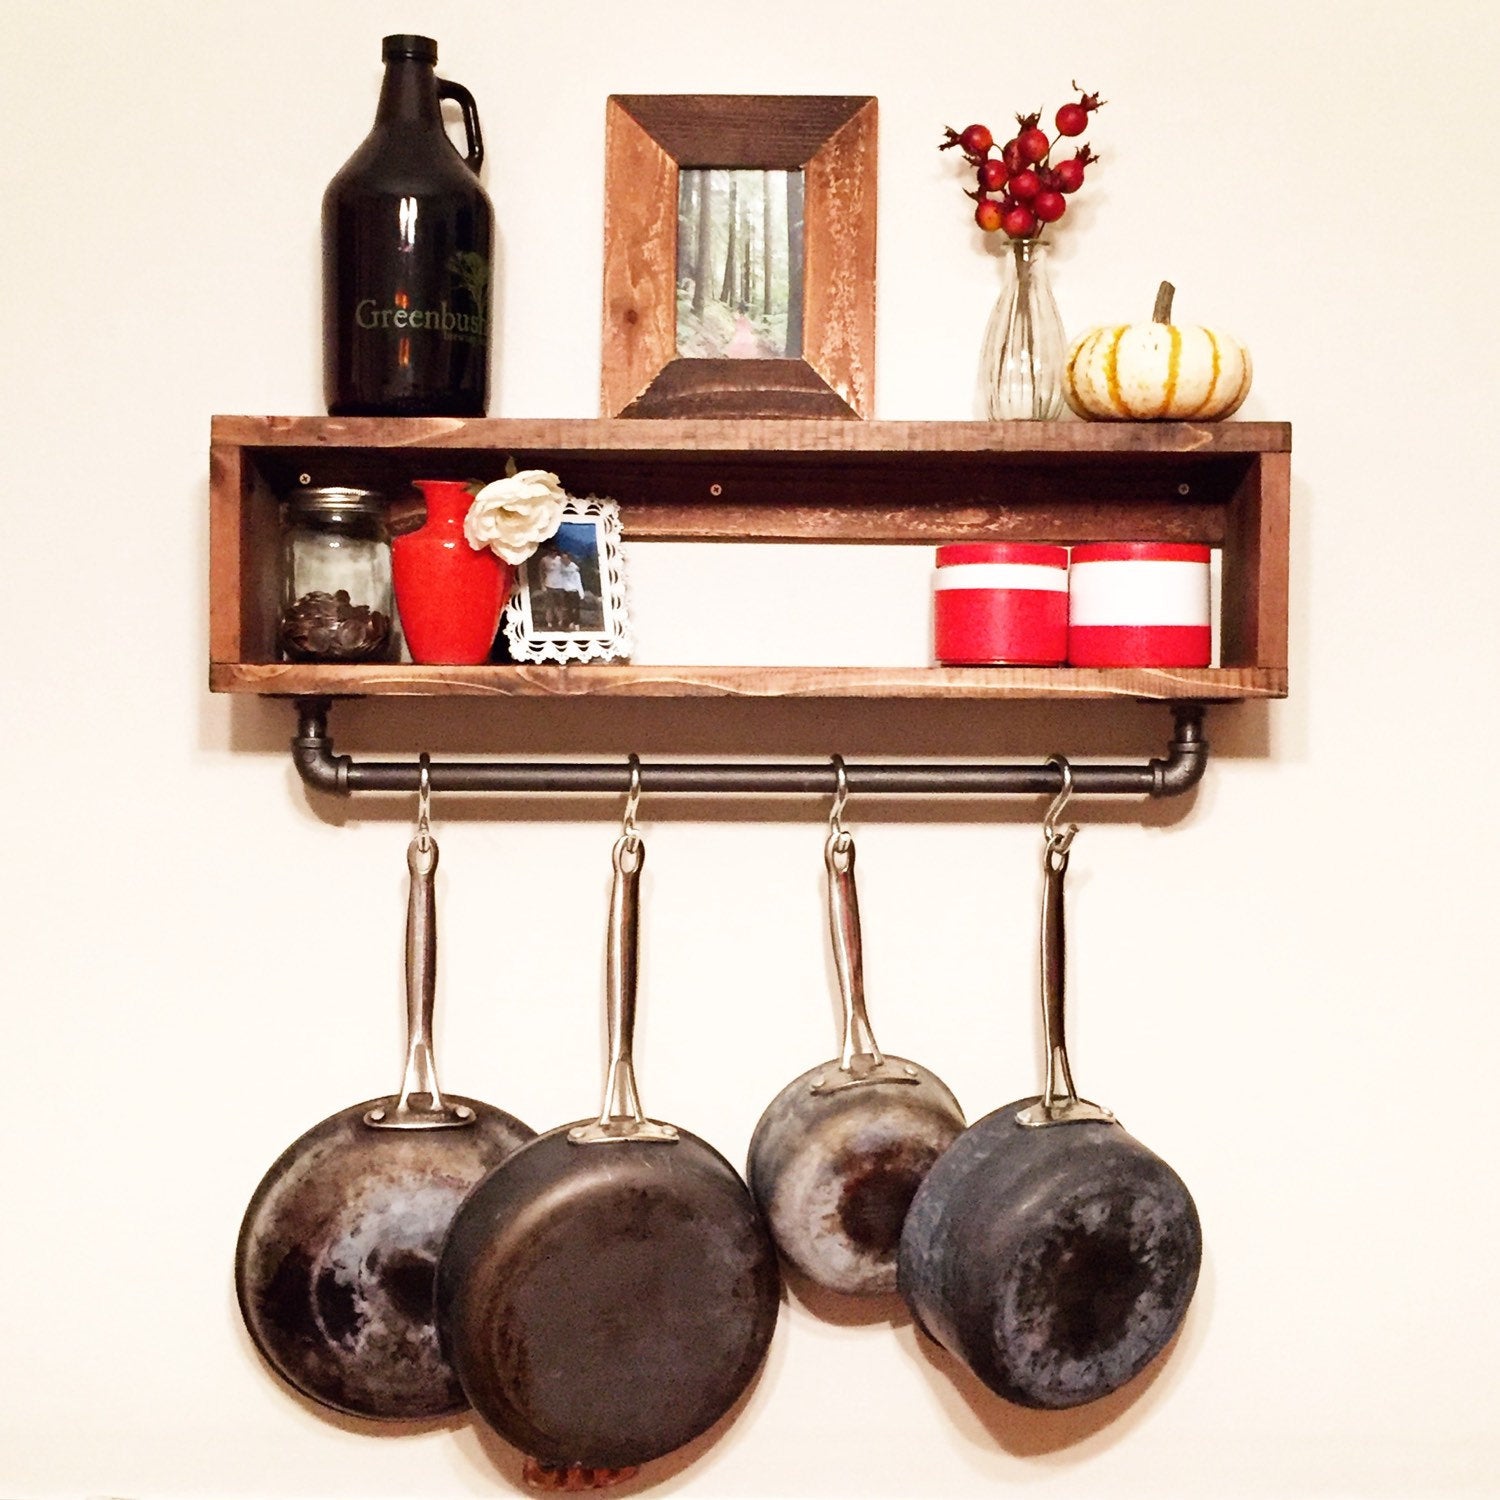 Rustic Spice Rack, Wooden Spice Rack, Wall Mounted Spice Rack